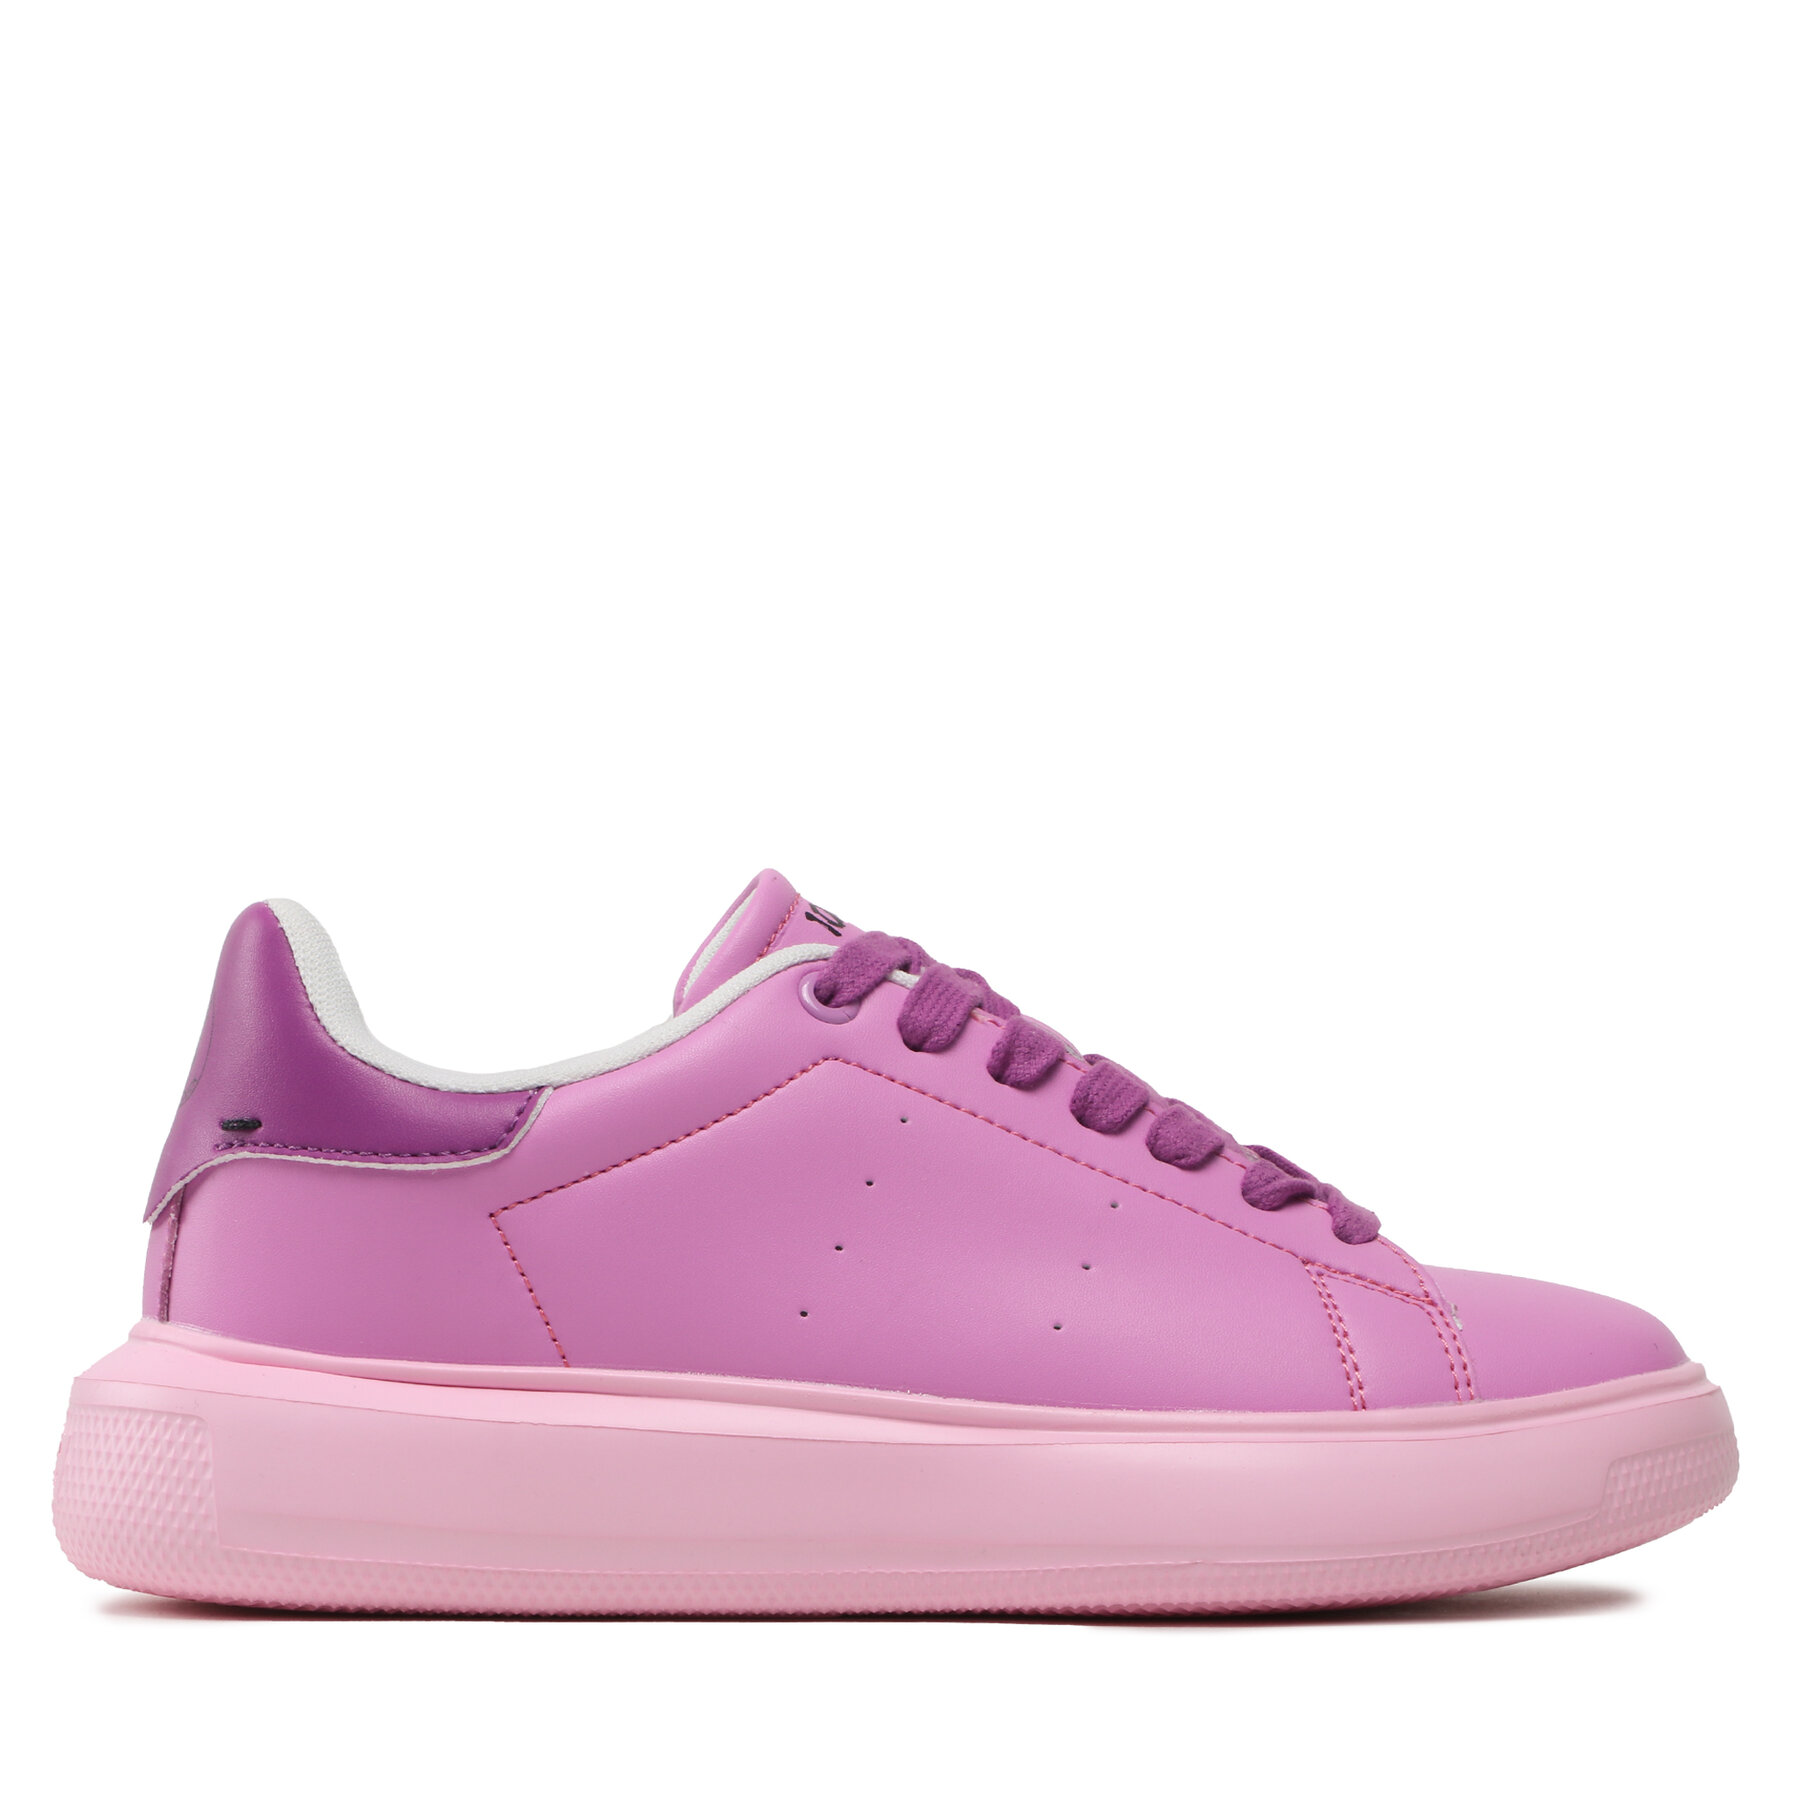 Sneakers Save The Duck DY1243U REPE16 Nomad Pink 80029 von Save The Duck